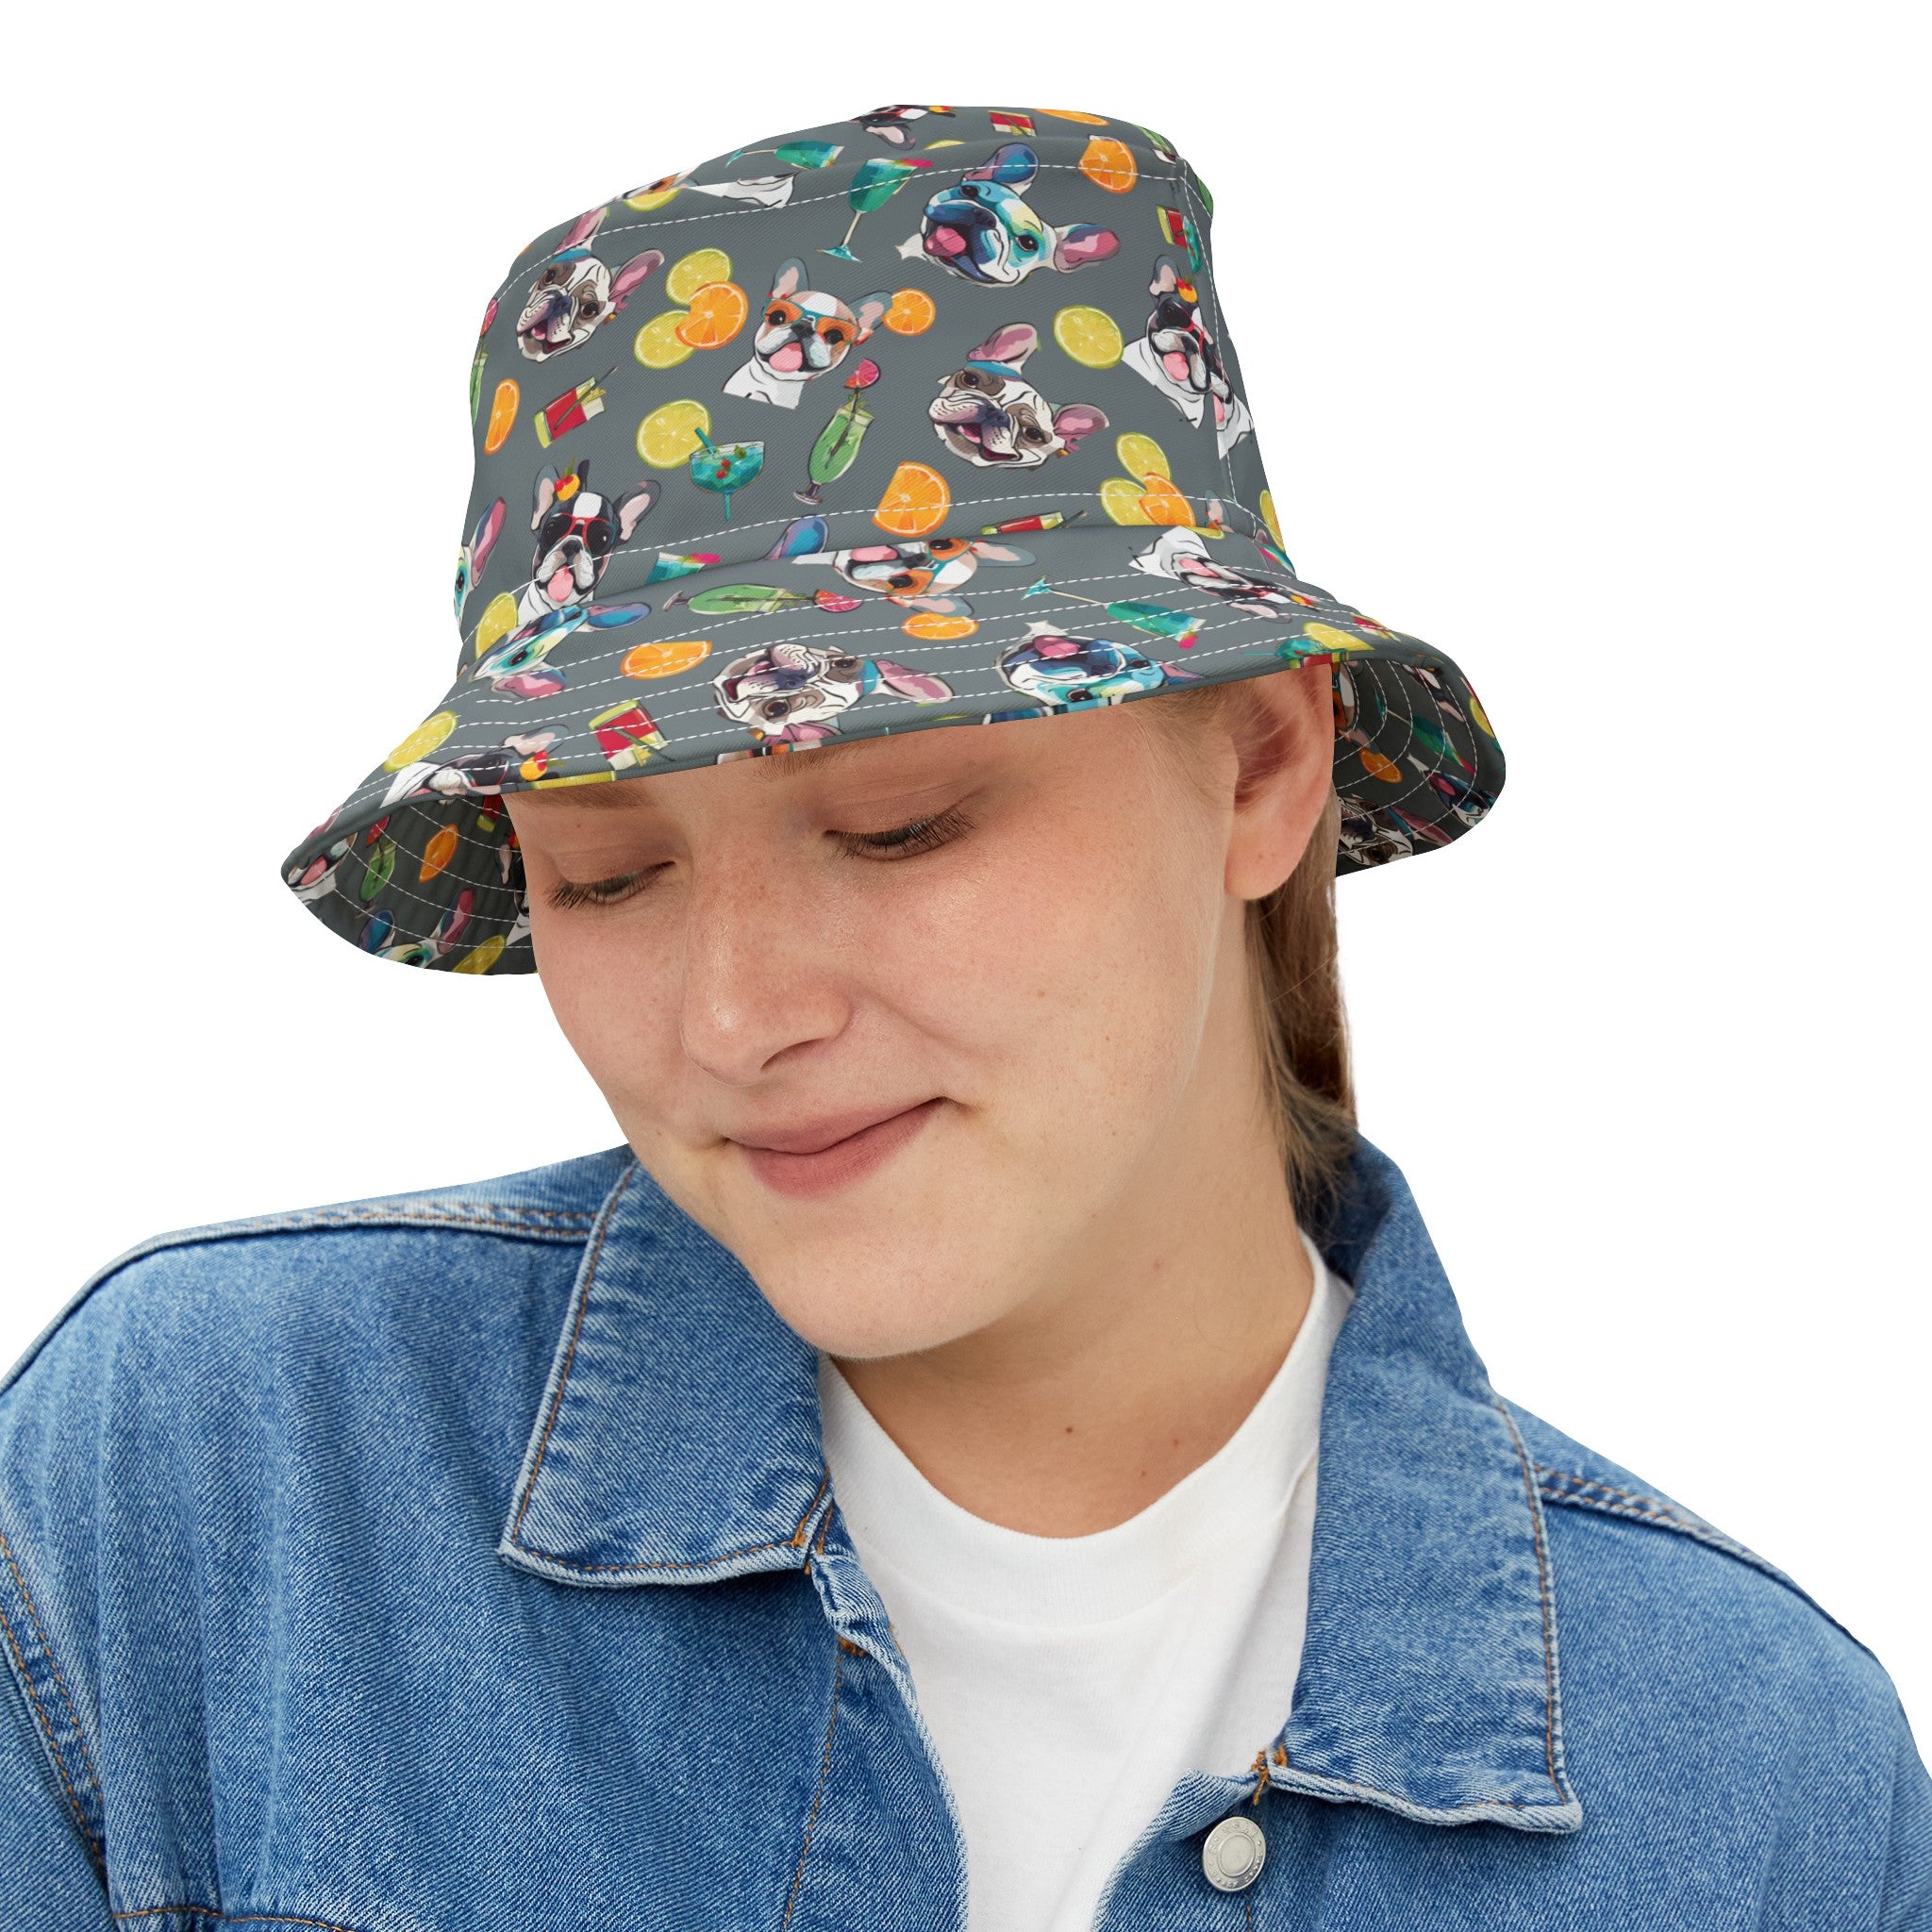 Tipsy Bully Unisex Summer Cocktail Bucket Hat (French/Grey)